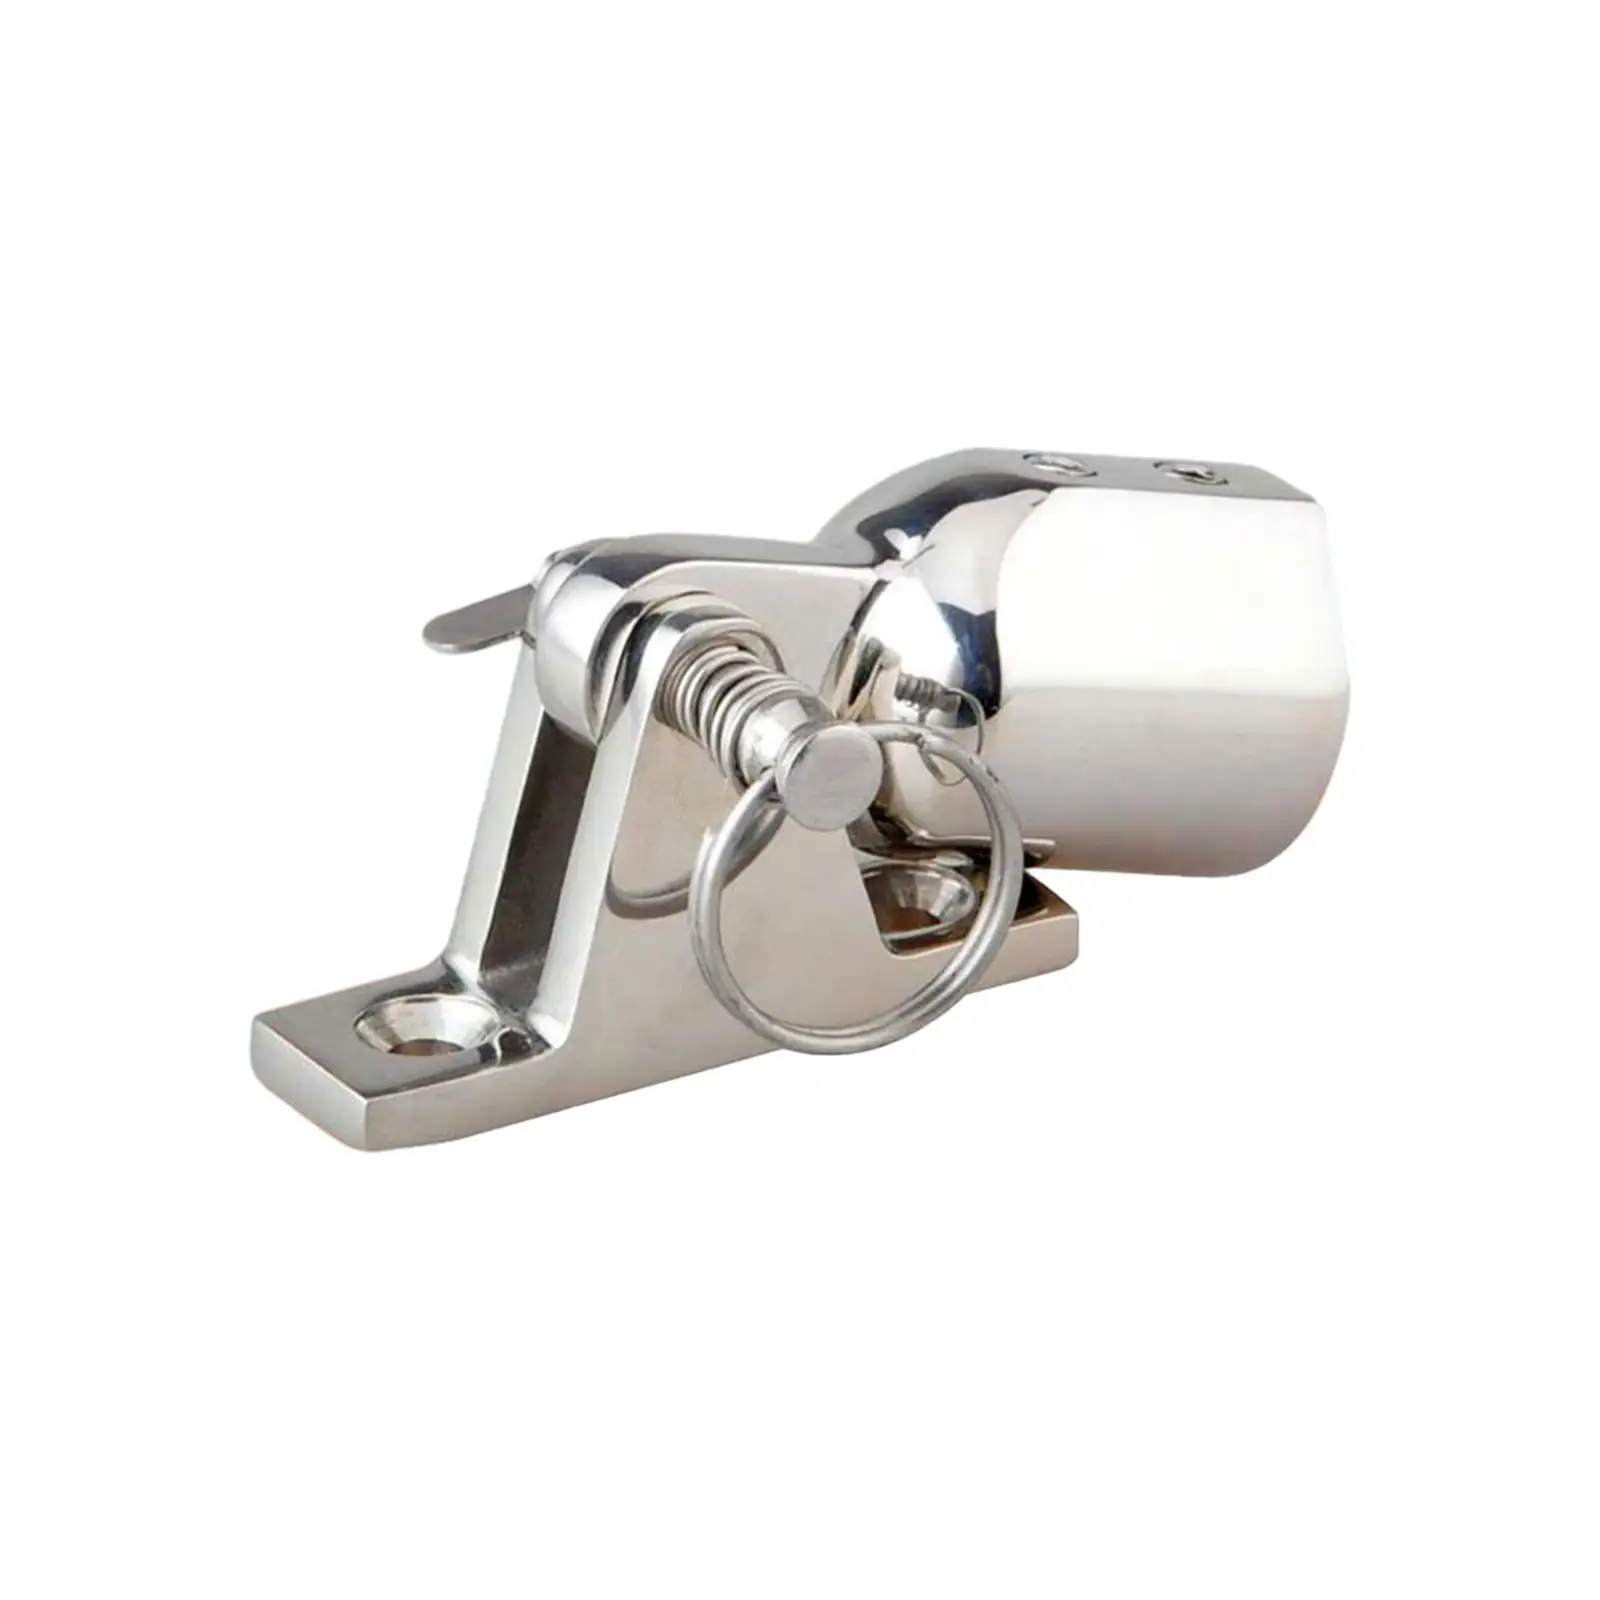 Marine Eye End Deck Hinge Jaw Slide Quick Release Stainless Steel Easy to Use Durable Cap External Eye End Boat Canopy Fittings